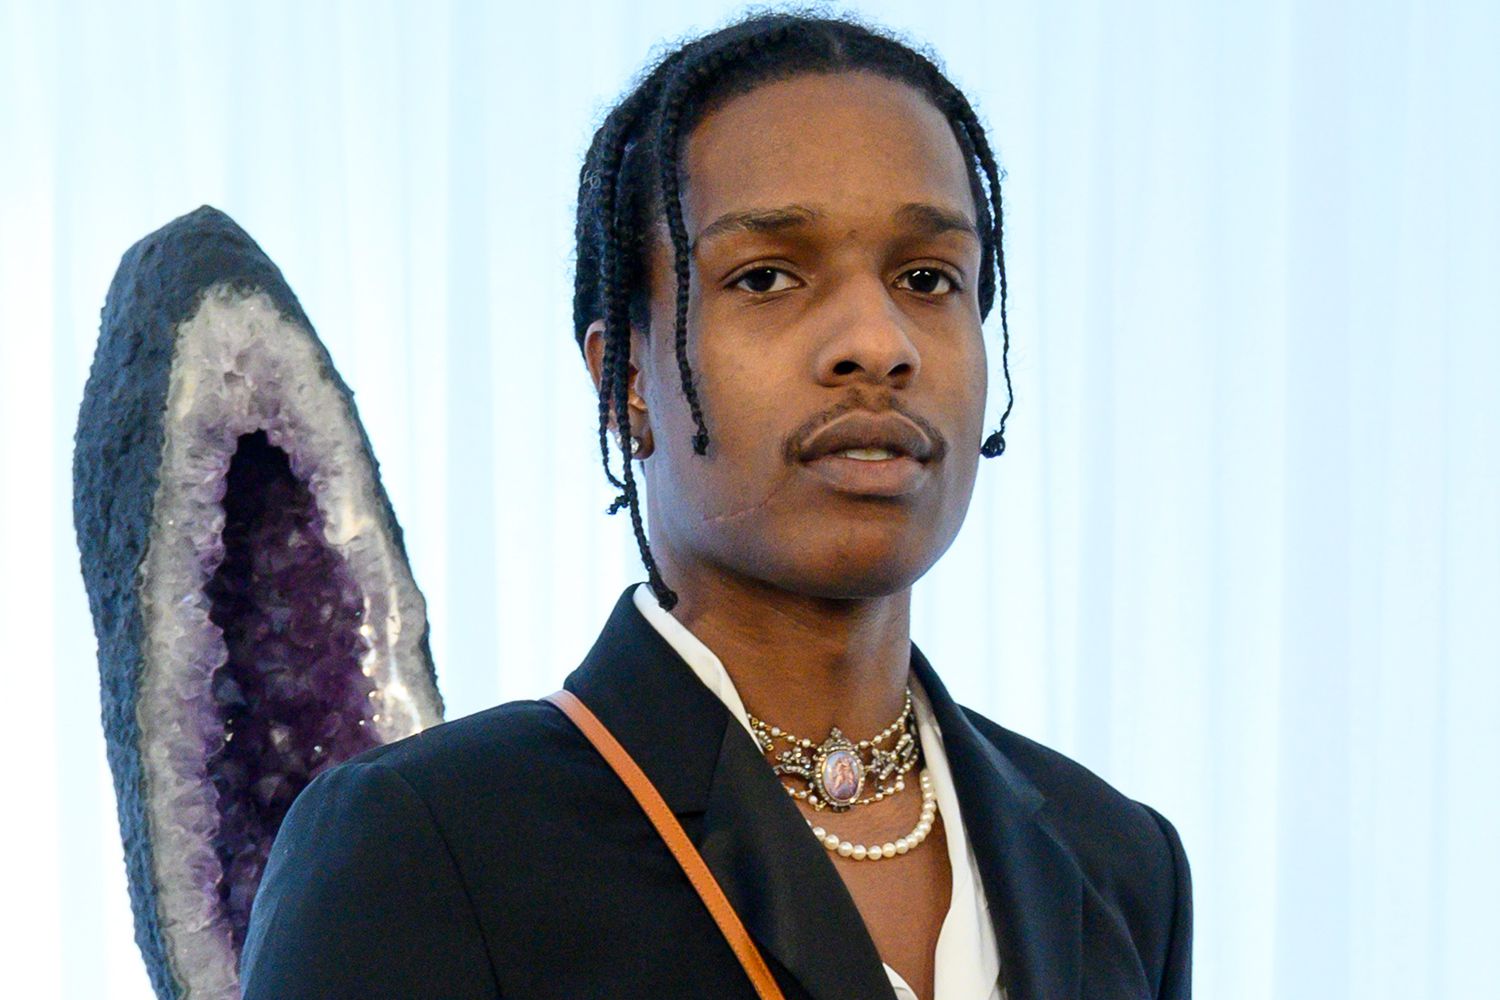 A$AP Rocky says his ‘DON’T BE DUMB’ album will be his best yet